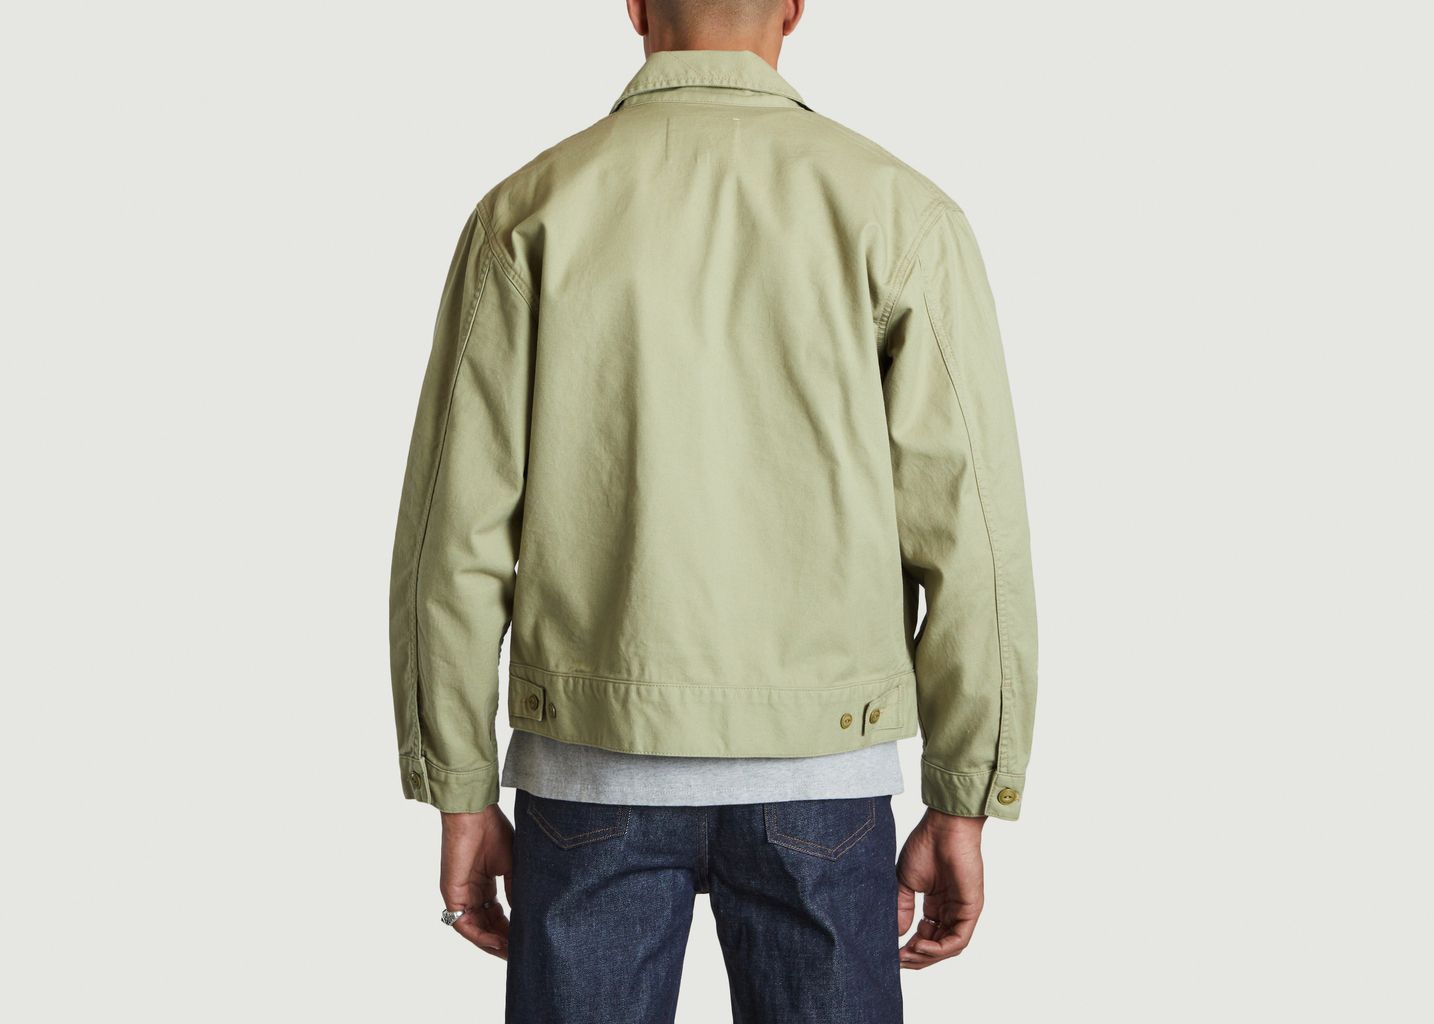 Straight jacket in Union twill Khaki Levi's Made and Crafted | L'Exception